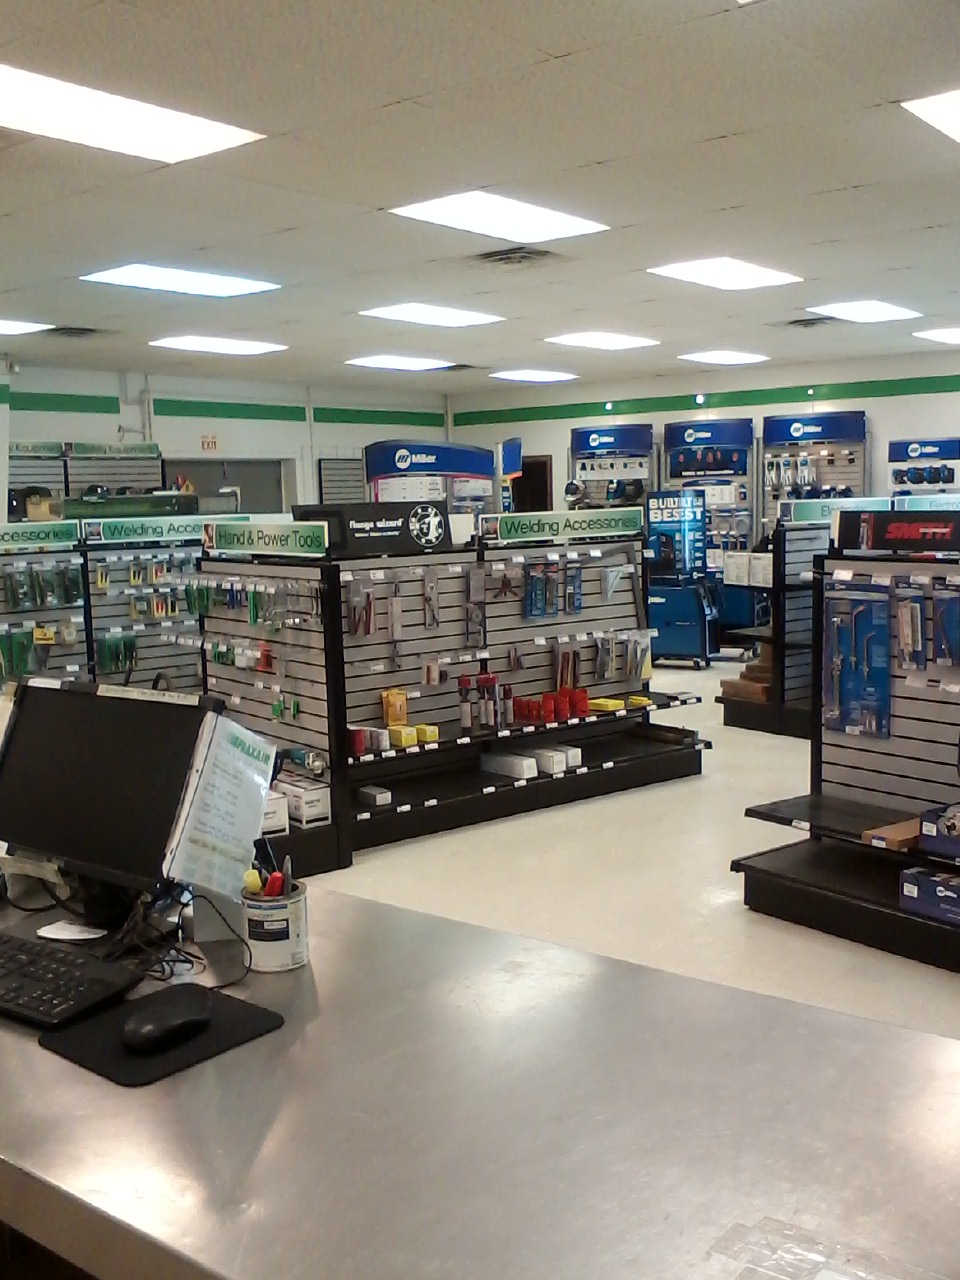 Praxair Welding Gas and Supply Store Photo